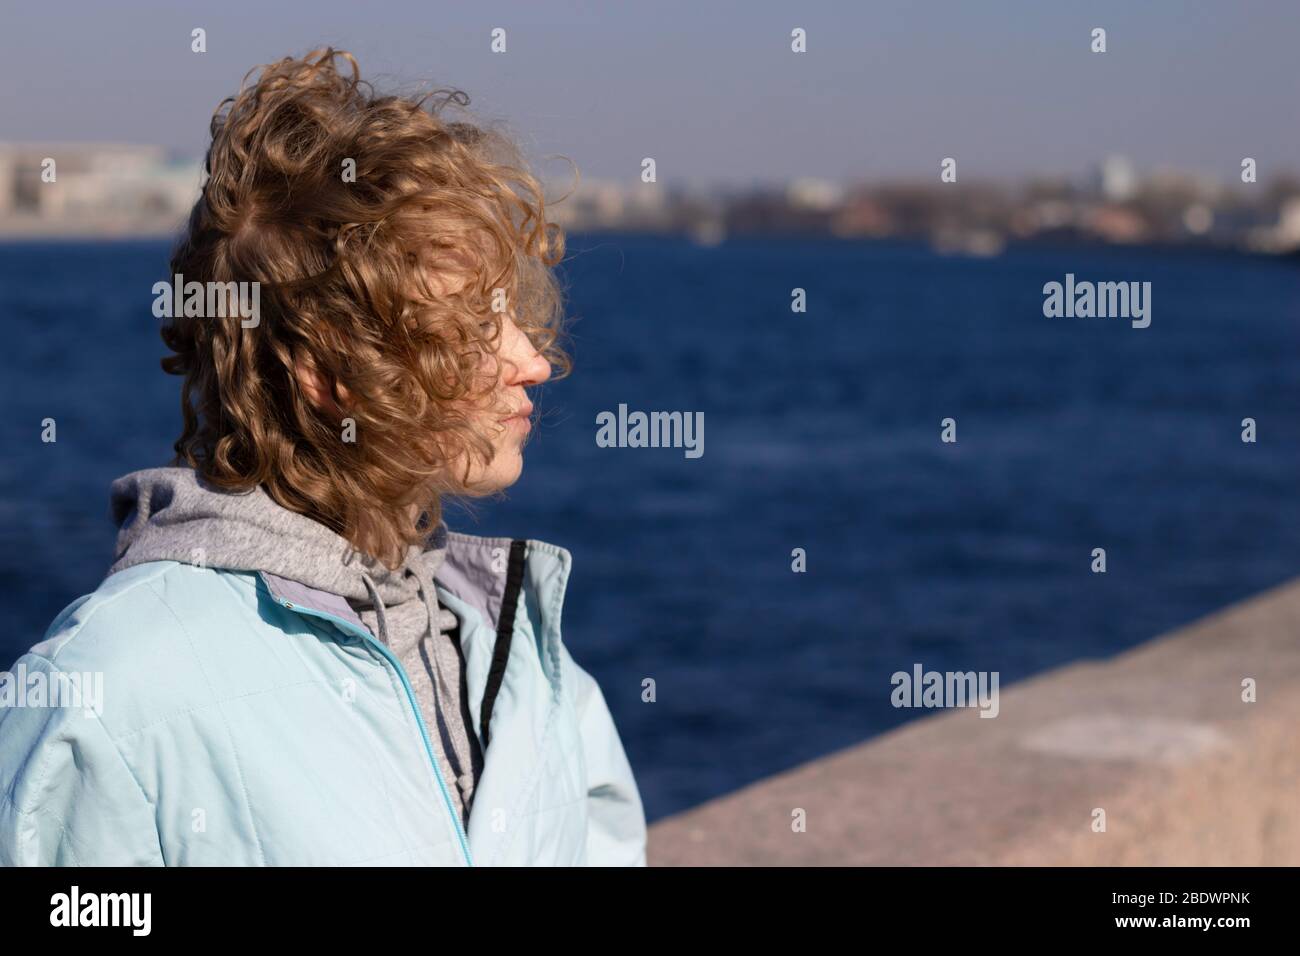 Side view of young girl with blonde curly hair waving in the wind. Copy space on water background Stock Photo